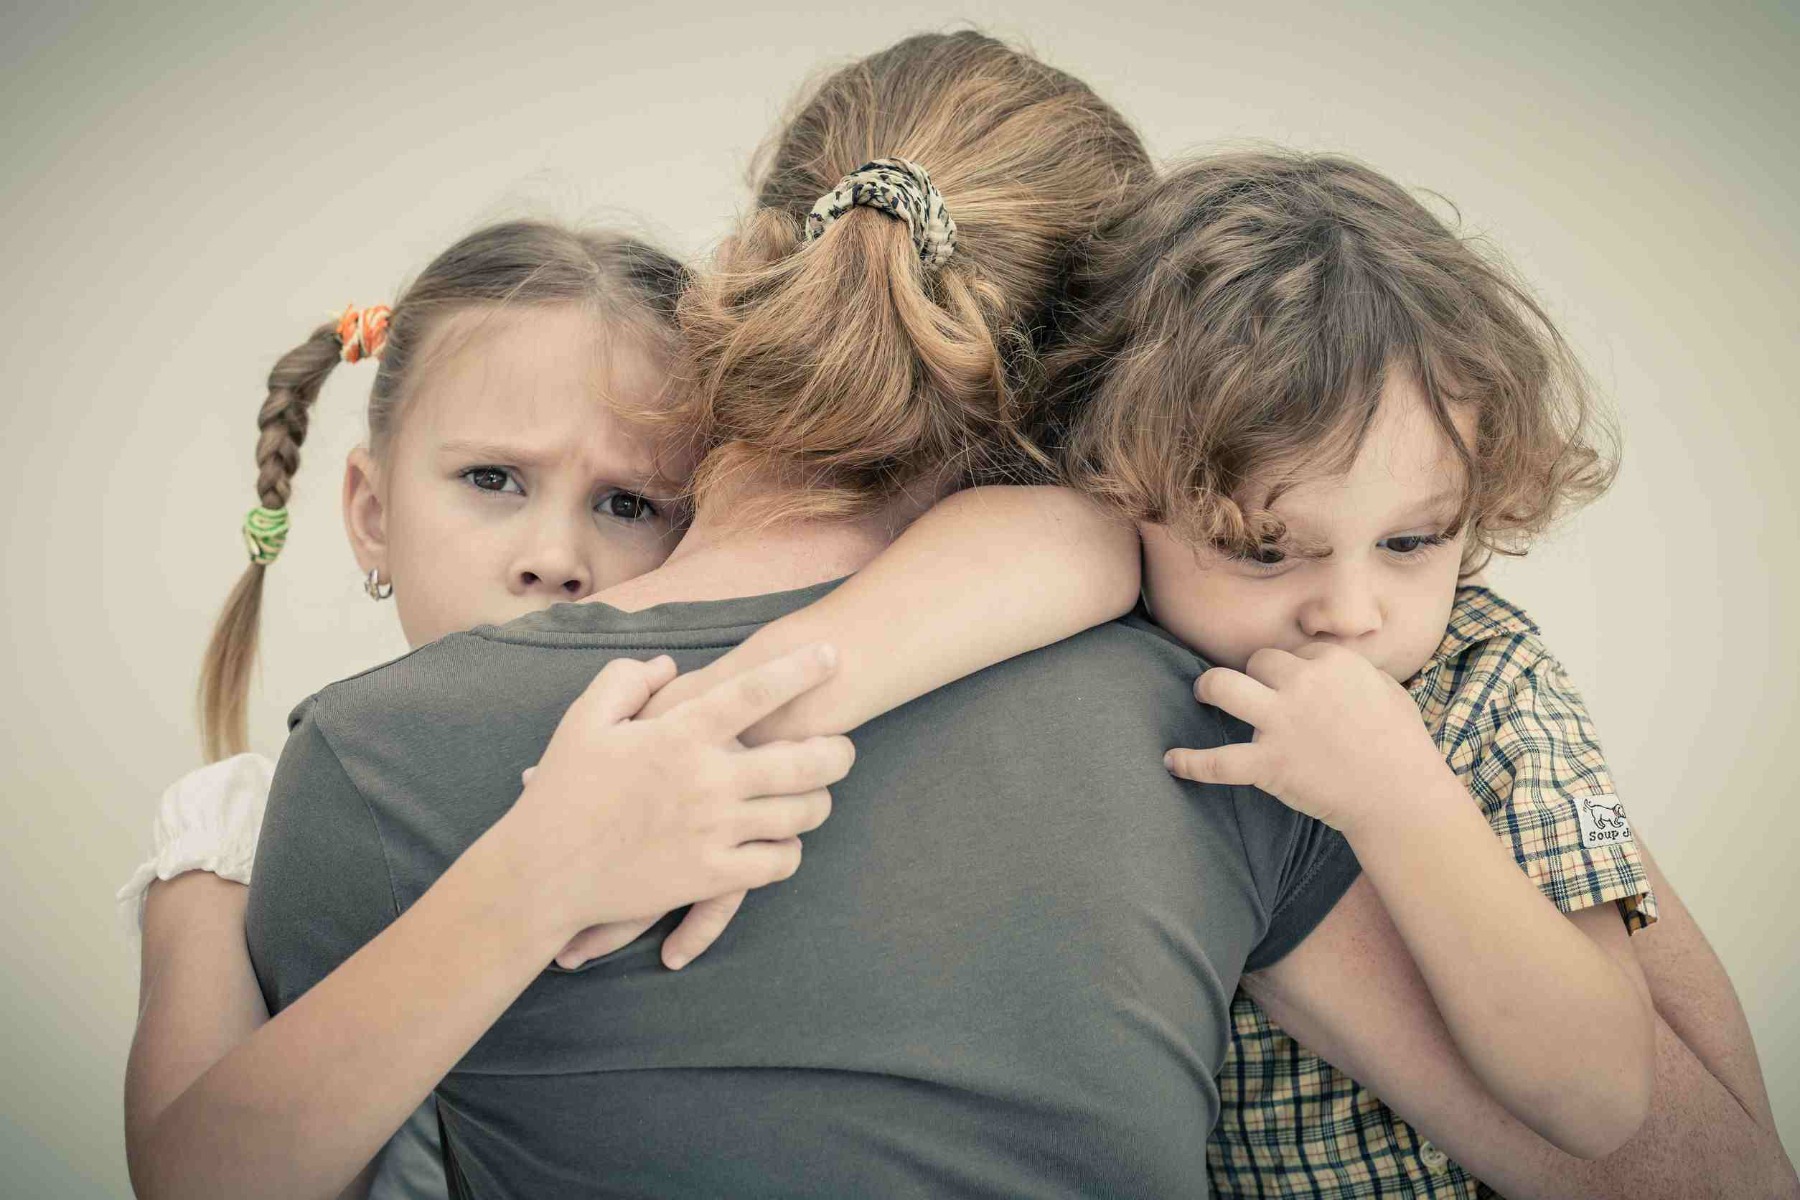 Two children grieving hugging their mother.